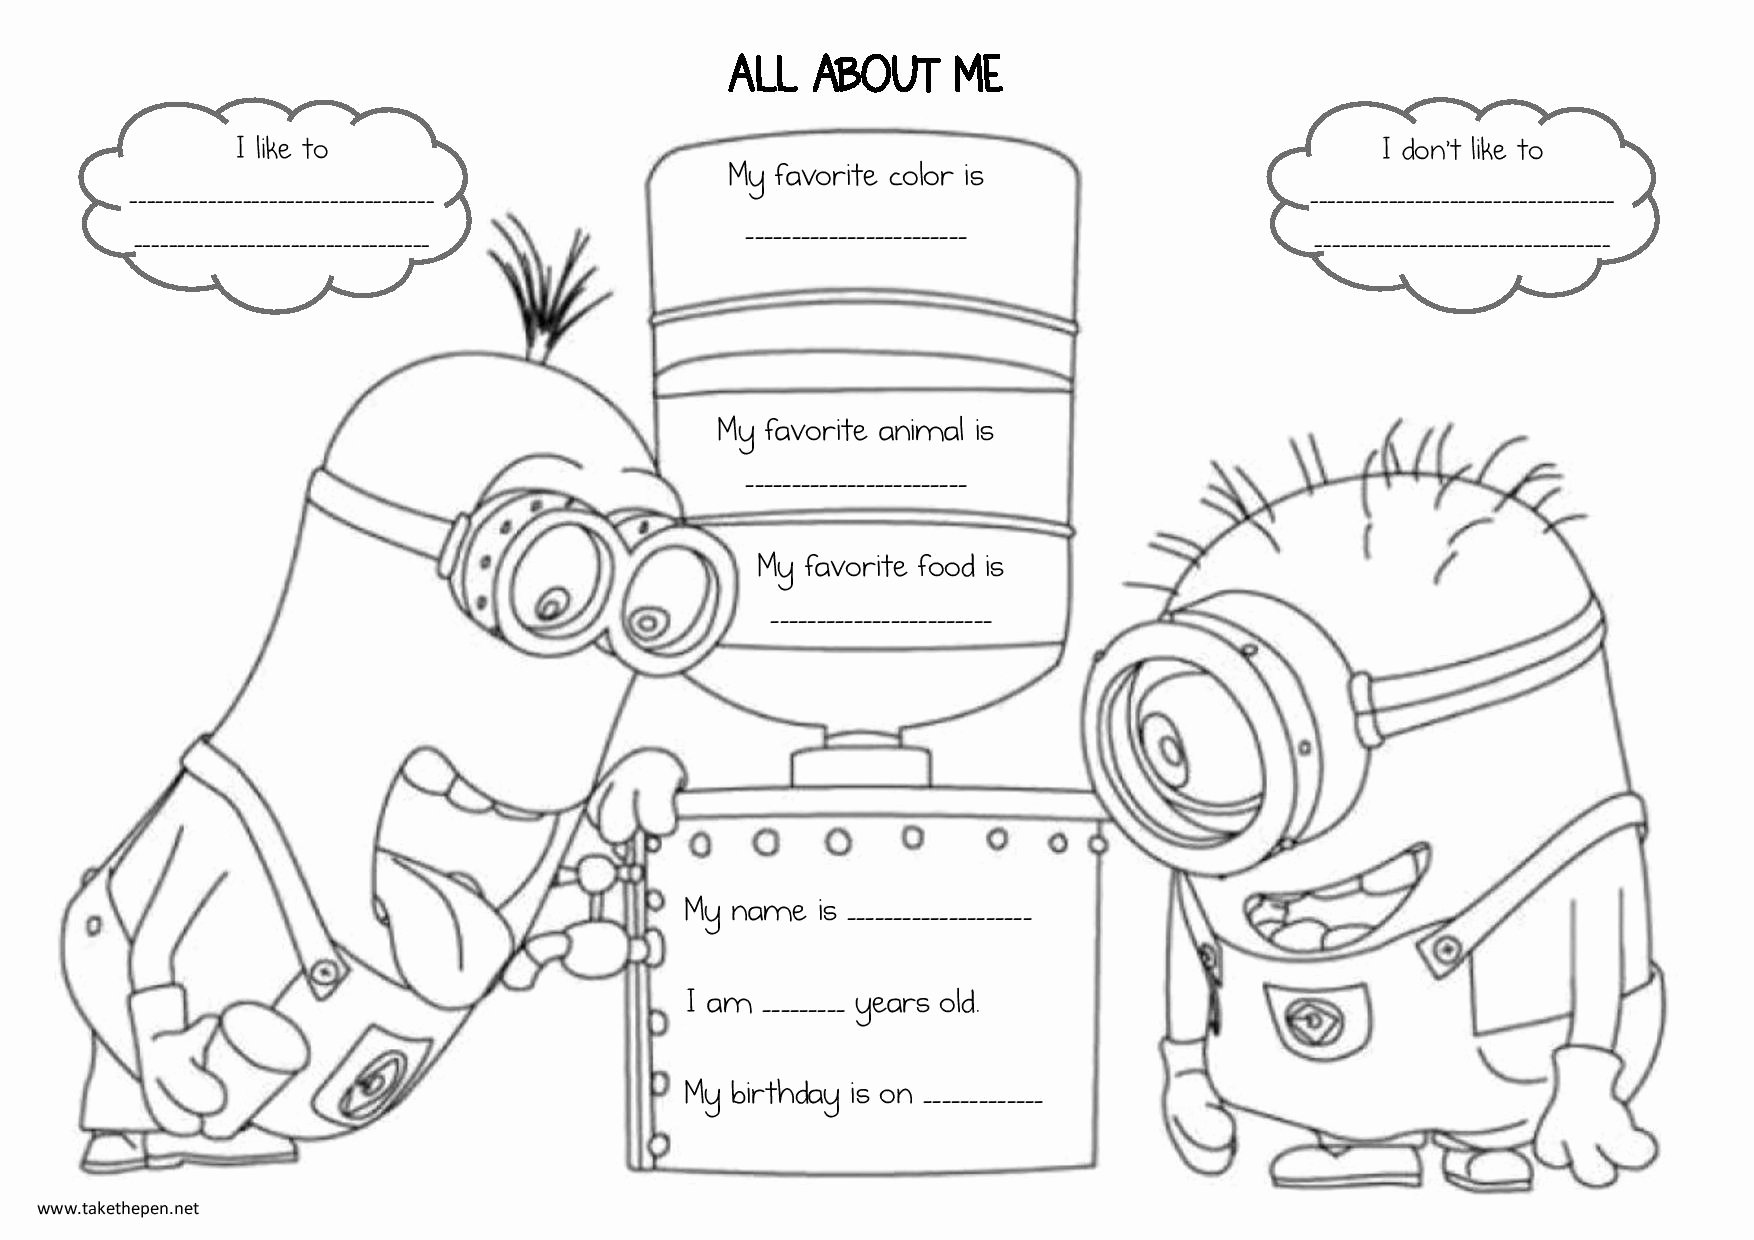 All About Me Worksheet Pdf Awesome All About Me Worksheetstake the Pen